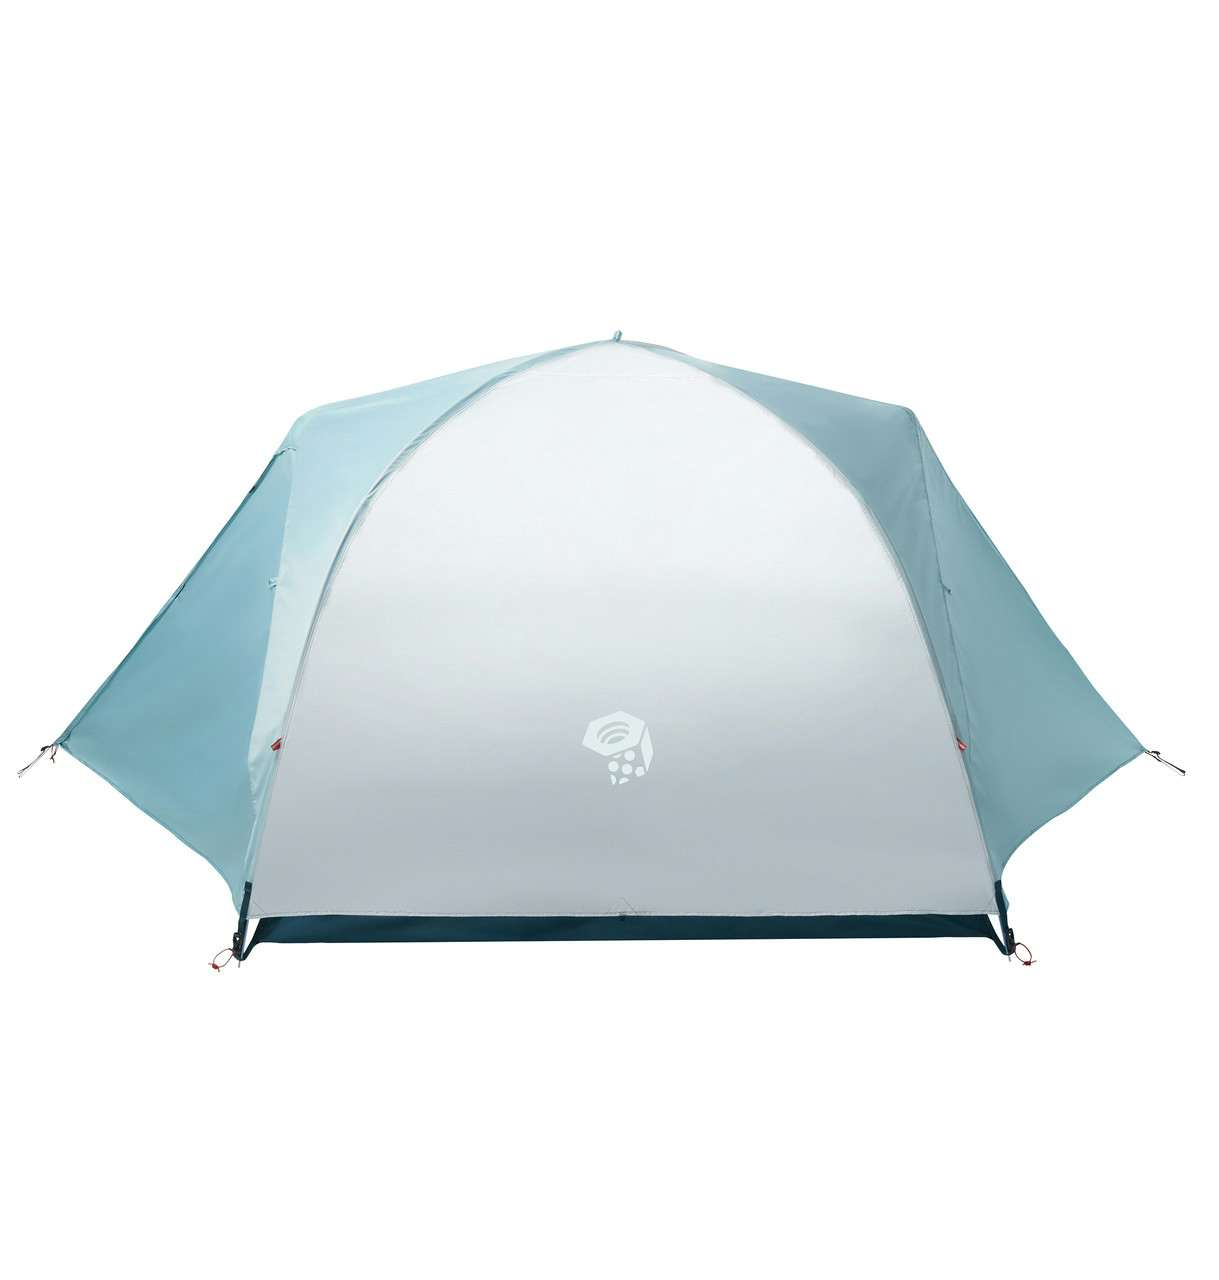 Mineral King 3-Person Tent Grey Ice